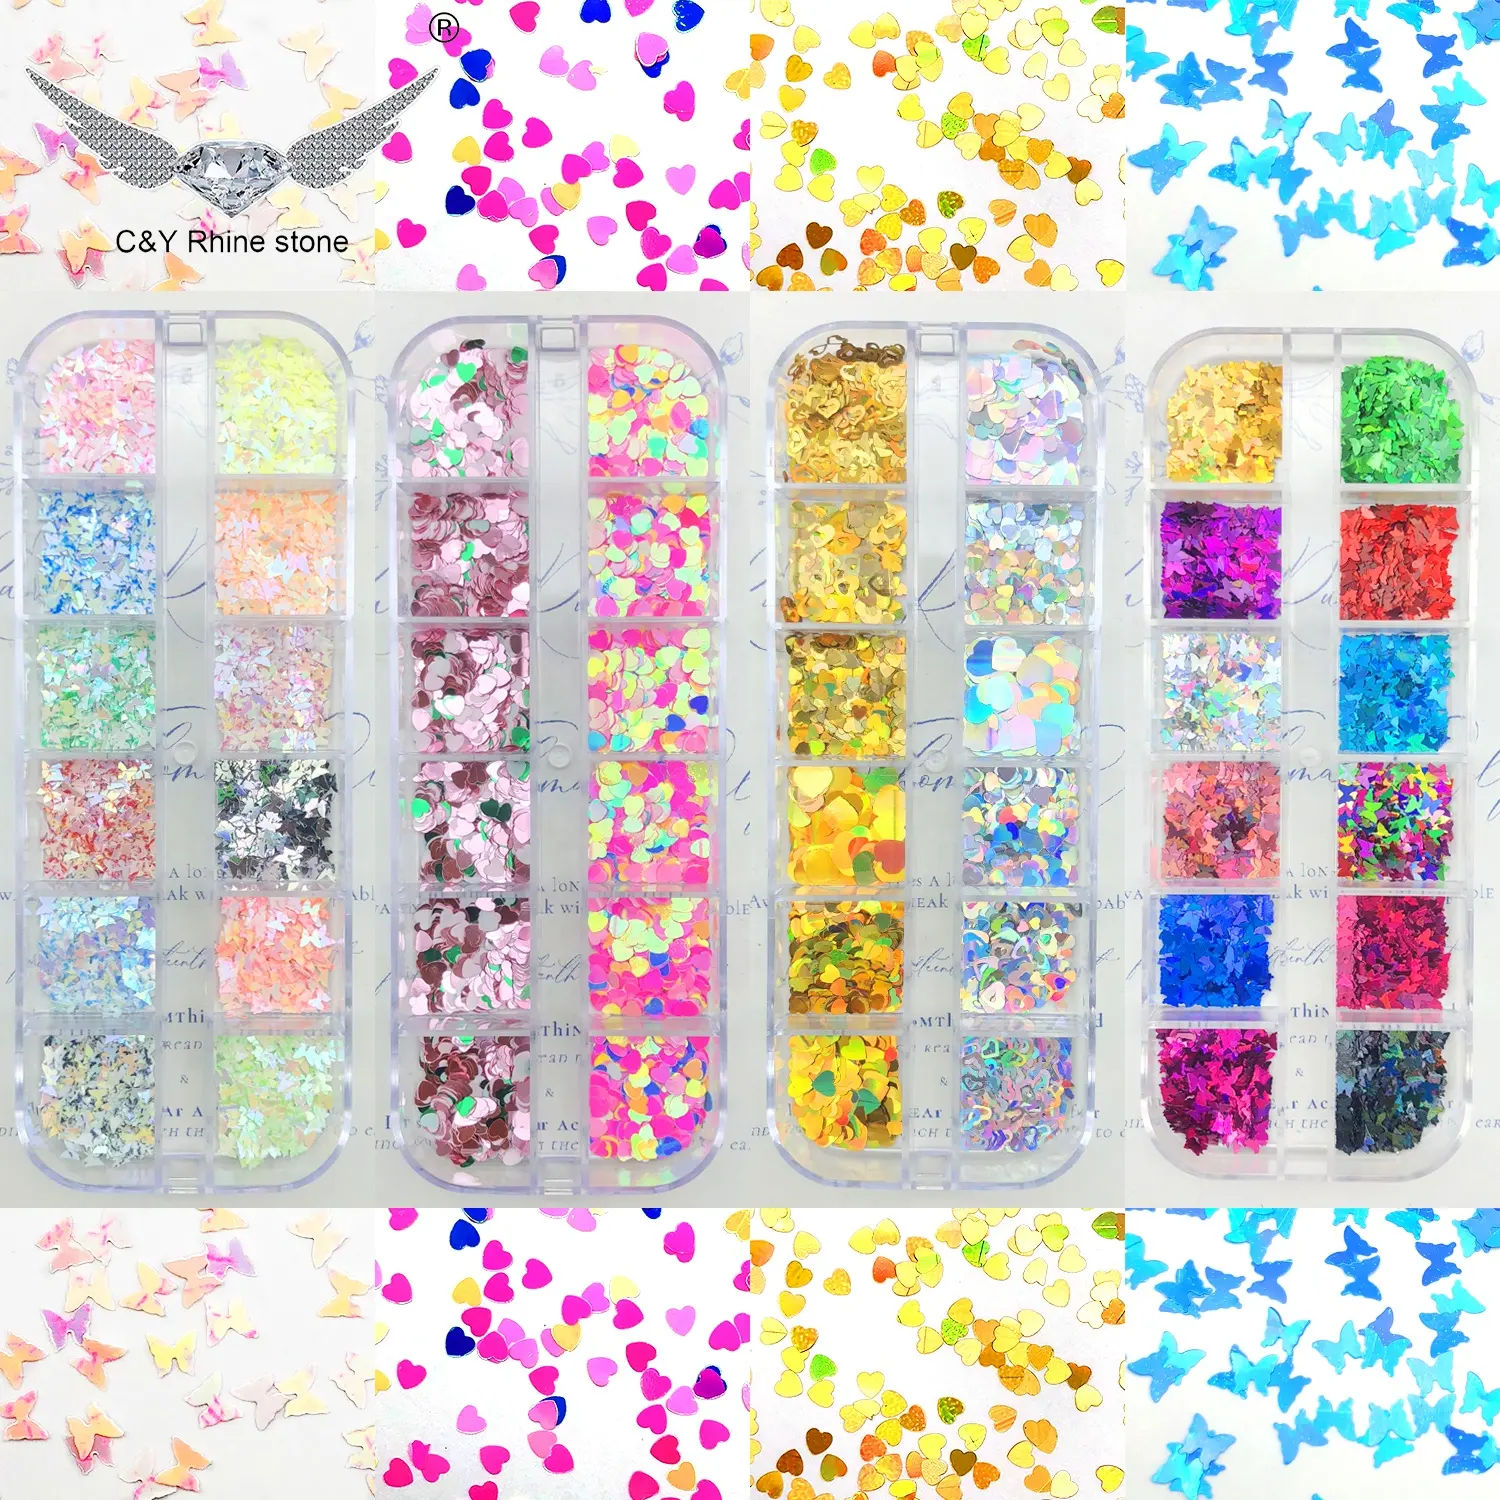 C&Y 12 Grids Box Butterfly Heart Glitter Mermaid Scale Halloween Nail Art Stickers Decals Nails